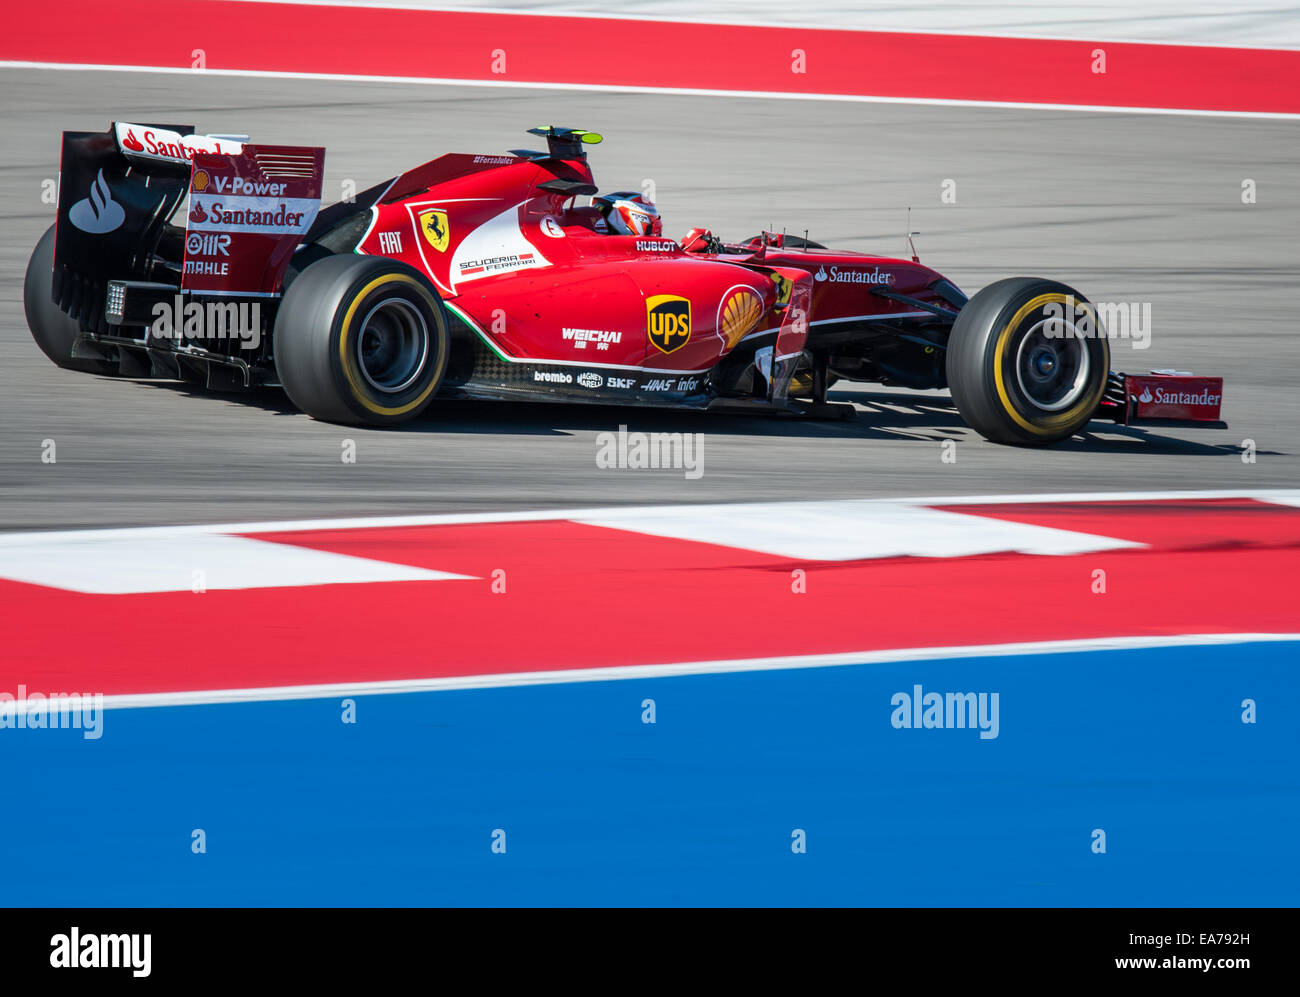 Kimi Räikkönen of Ferrari at Circuit of the Americas in Austin, Texas during practice for the 2014 United States Grand Prix. Stock Photo